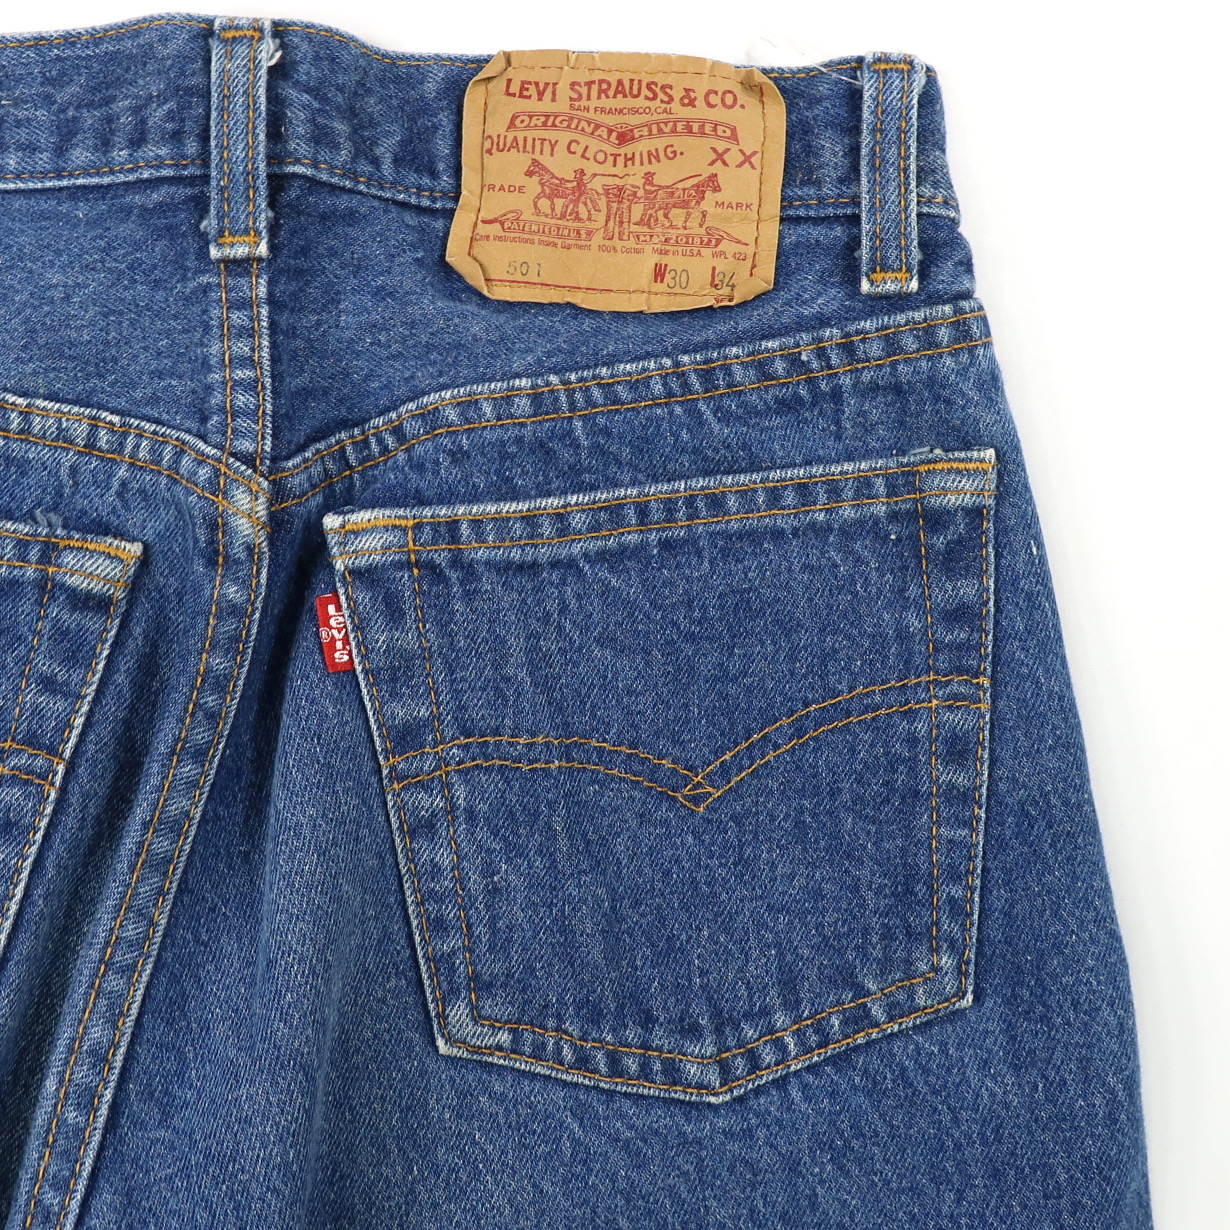 90s Levi's リーバイス501 USA製 W30/エルパソ工場